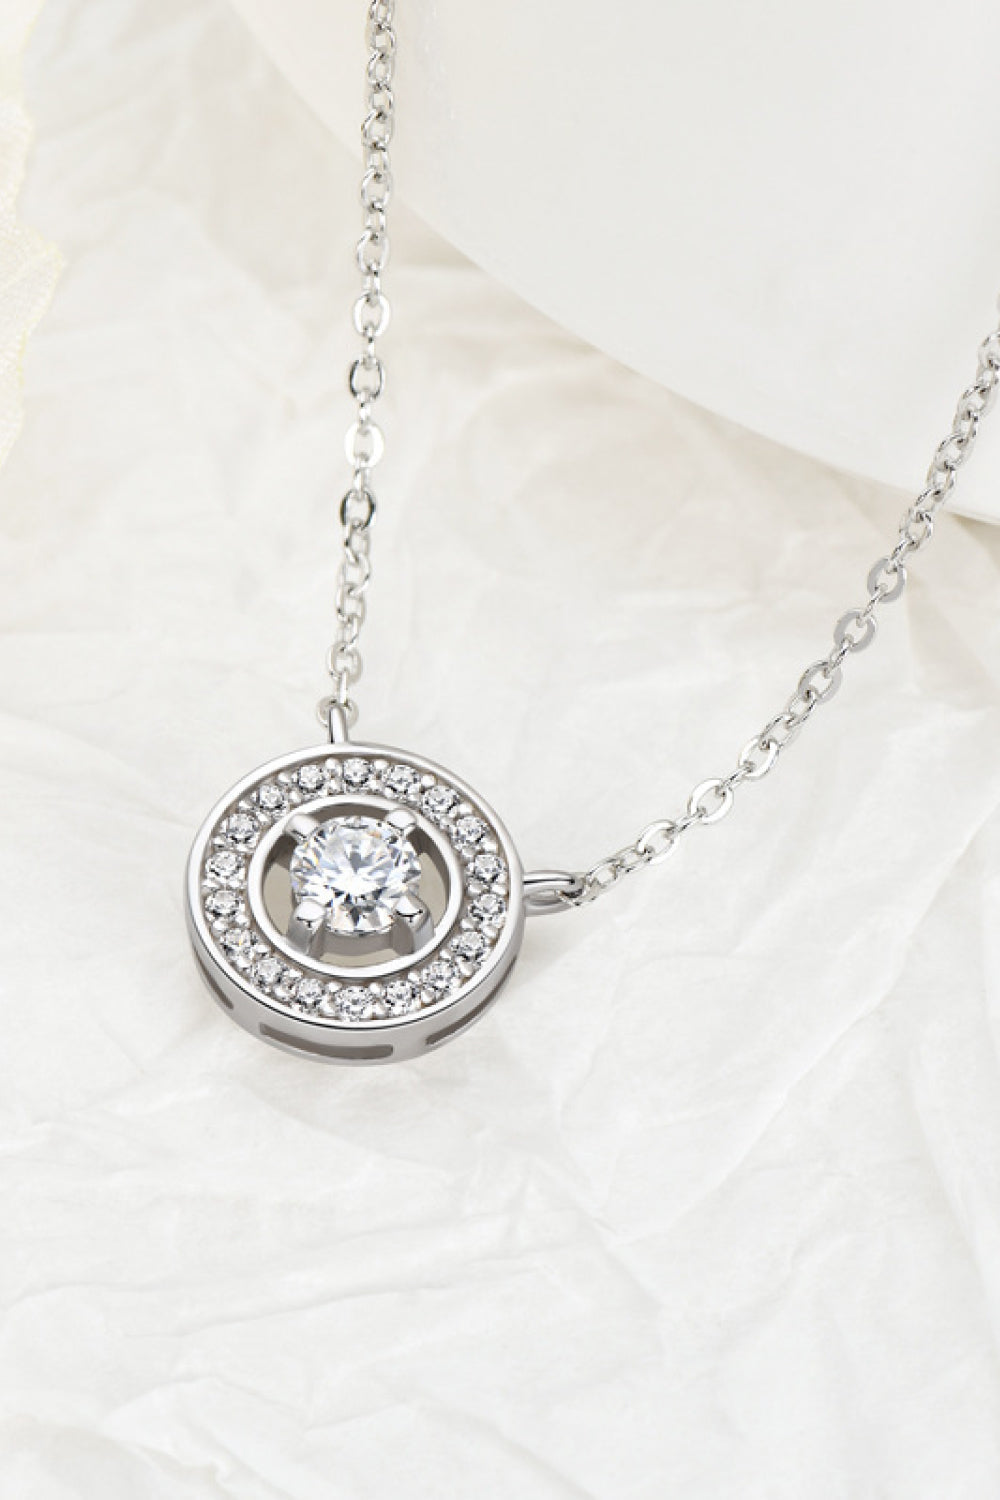 Necklaces - 925 Sterling Silver Moissanite Geometric Pendant Necklace